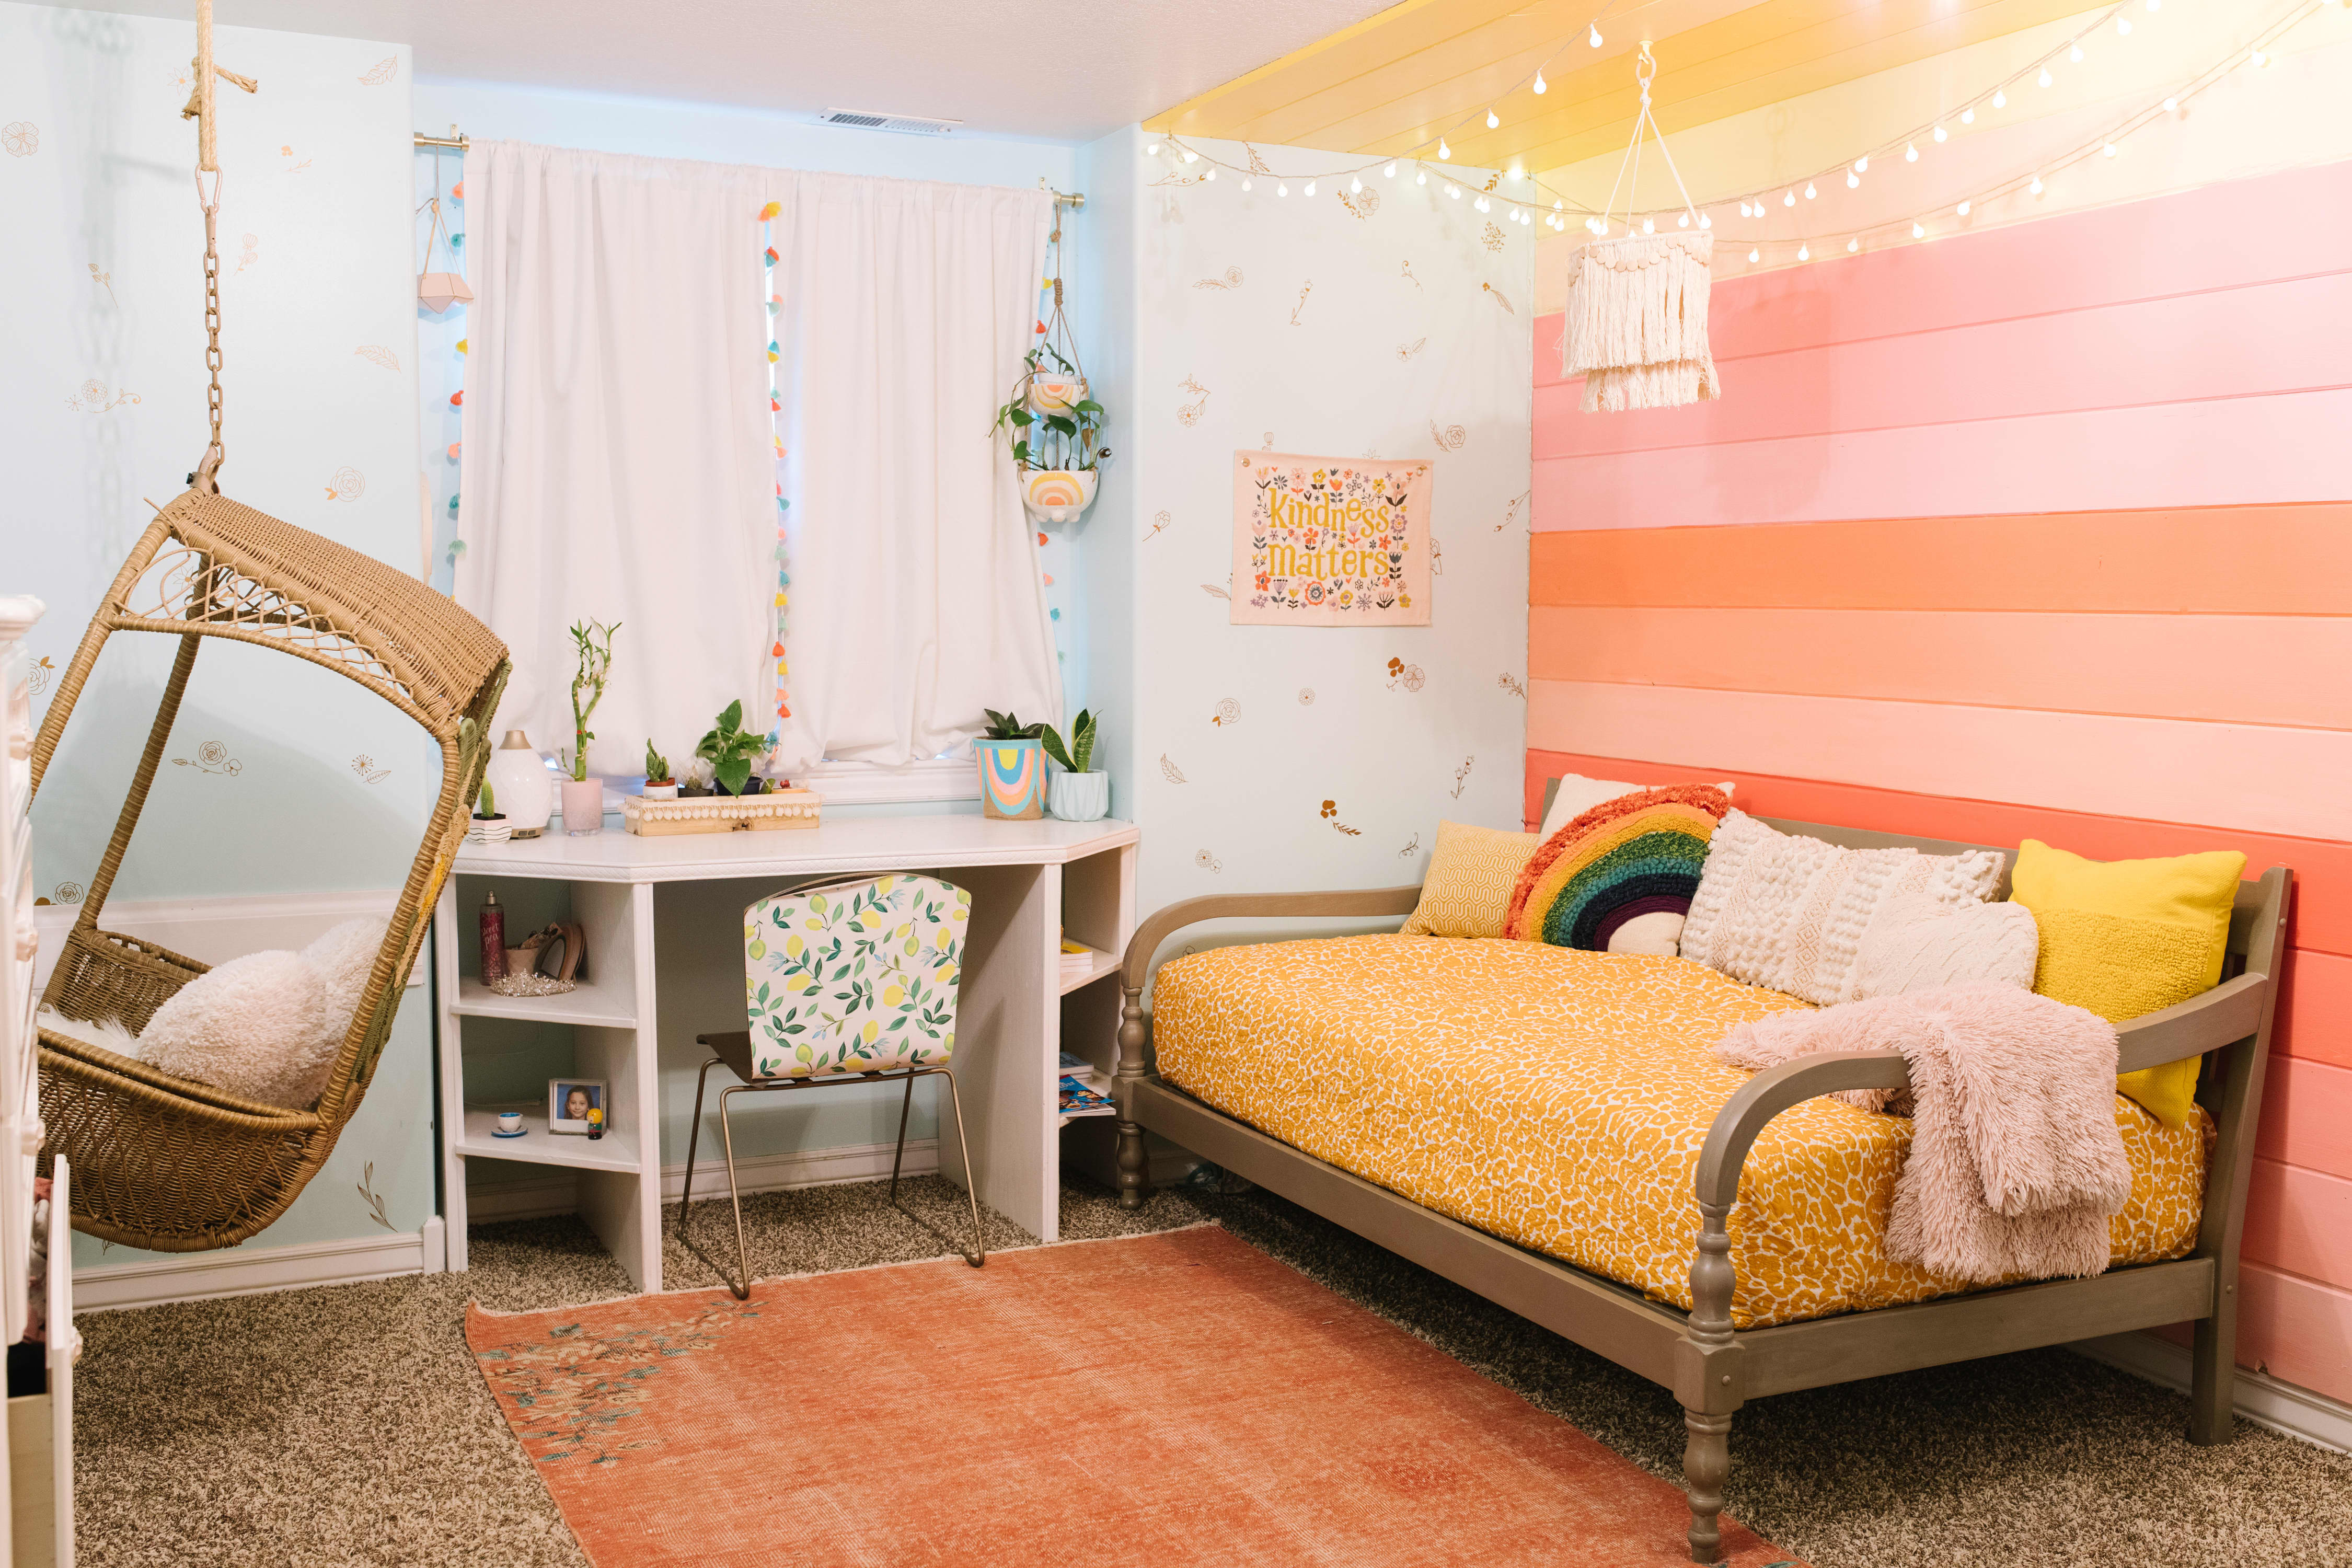 5 Paint Colors to Add Fun to Your Kids' Room - Fillo